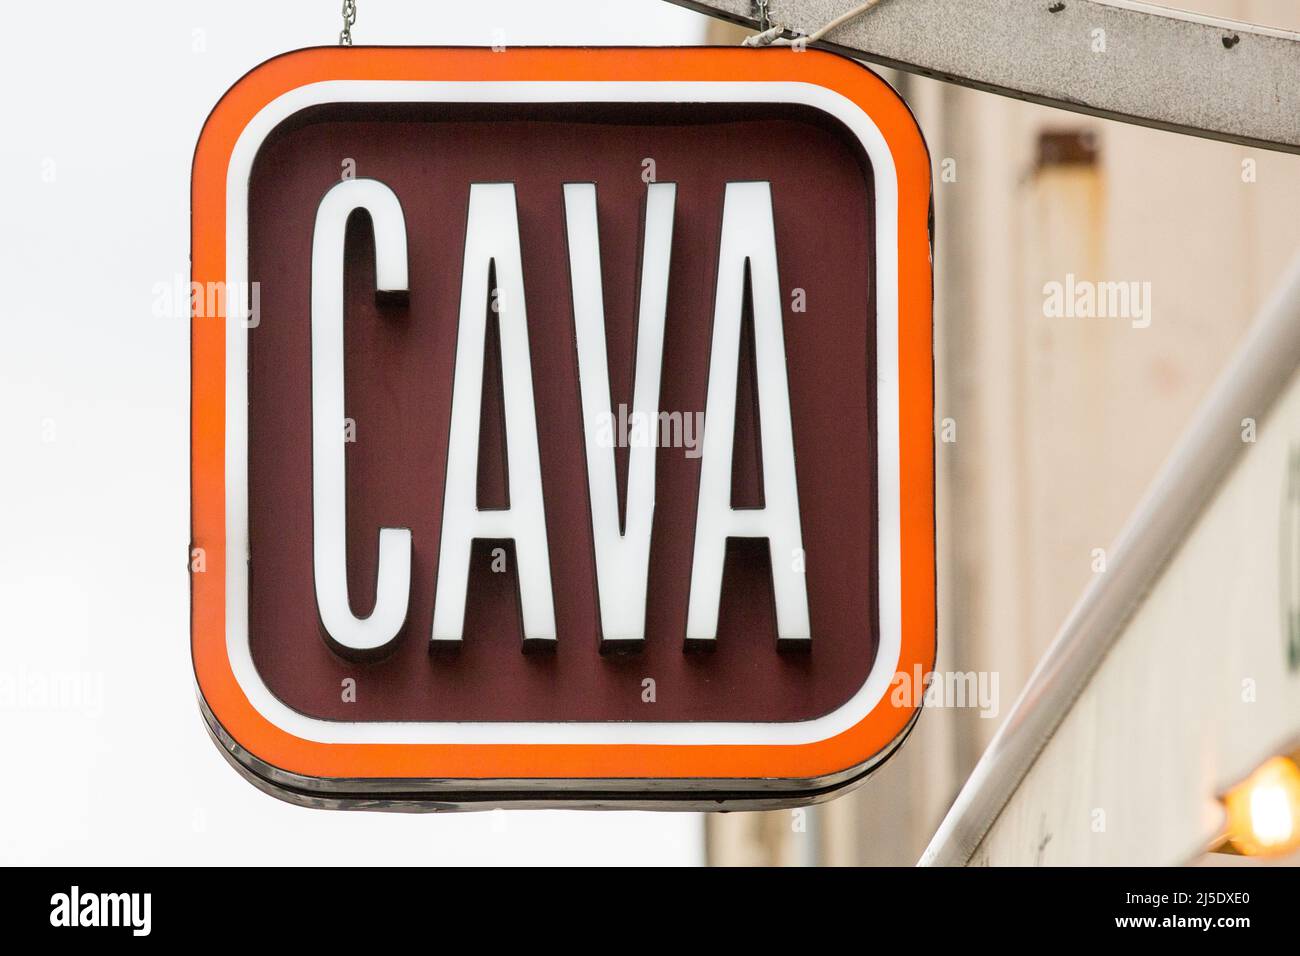 The Cava café signboard seen in Warsaw Stock Photo - Alamy